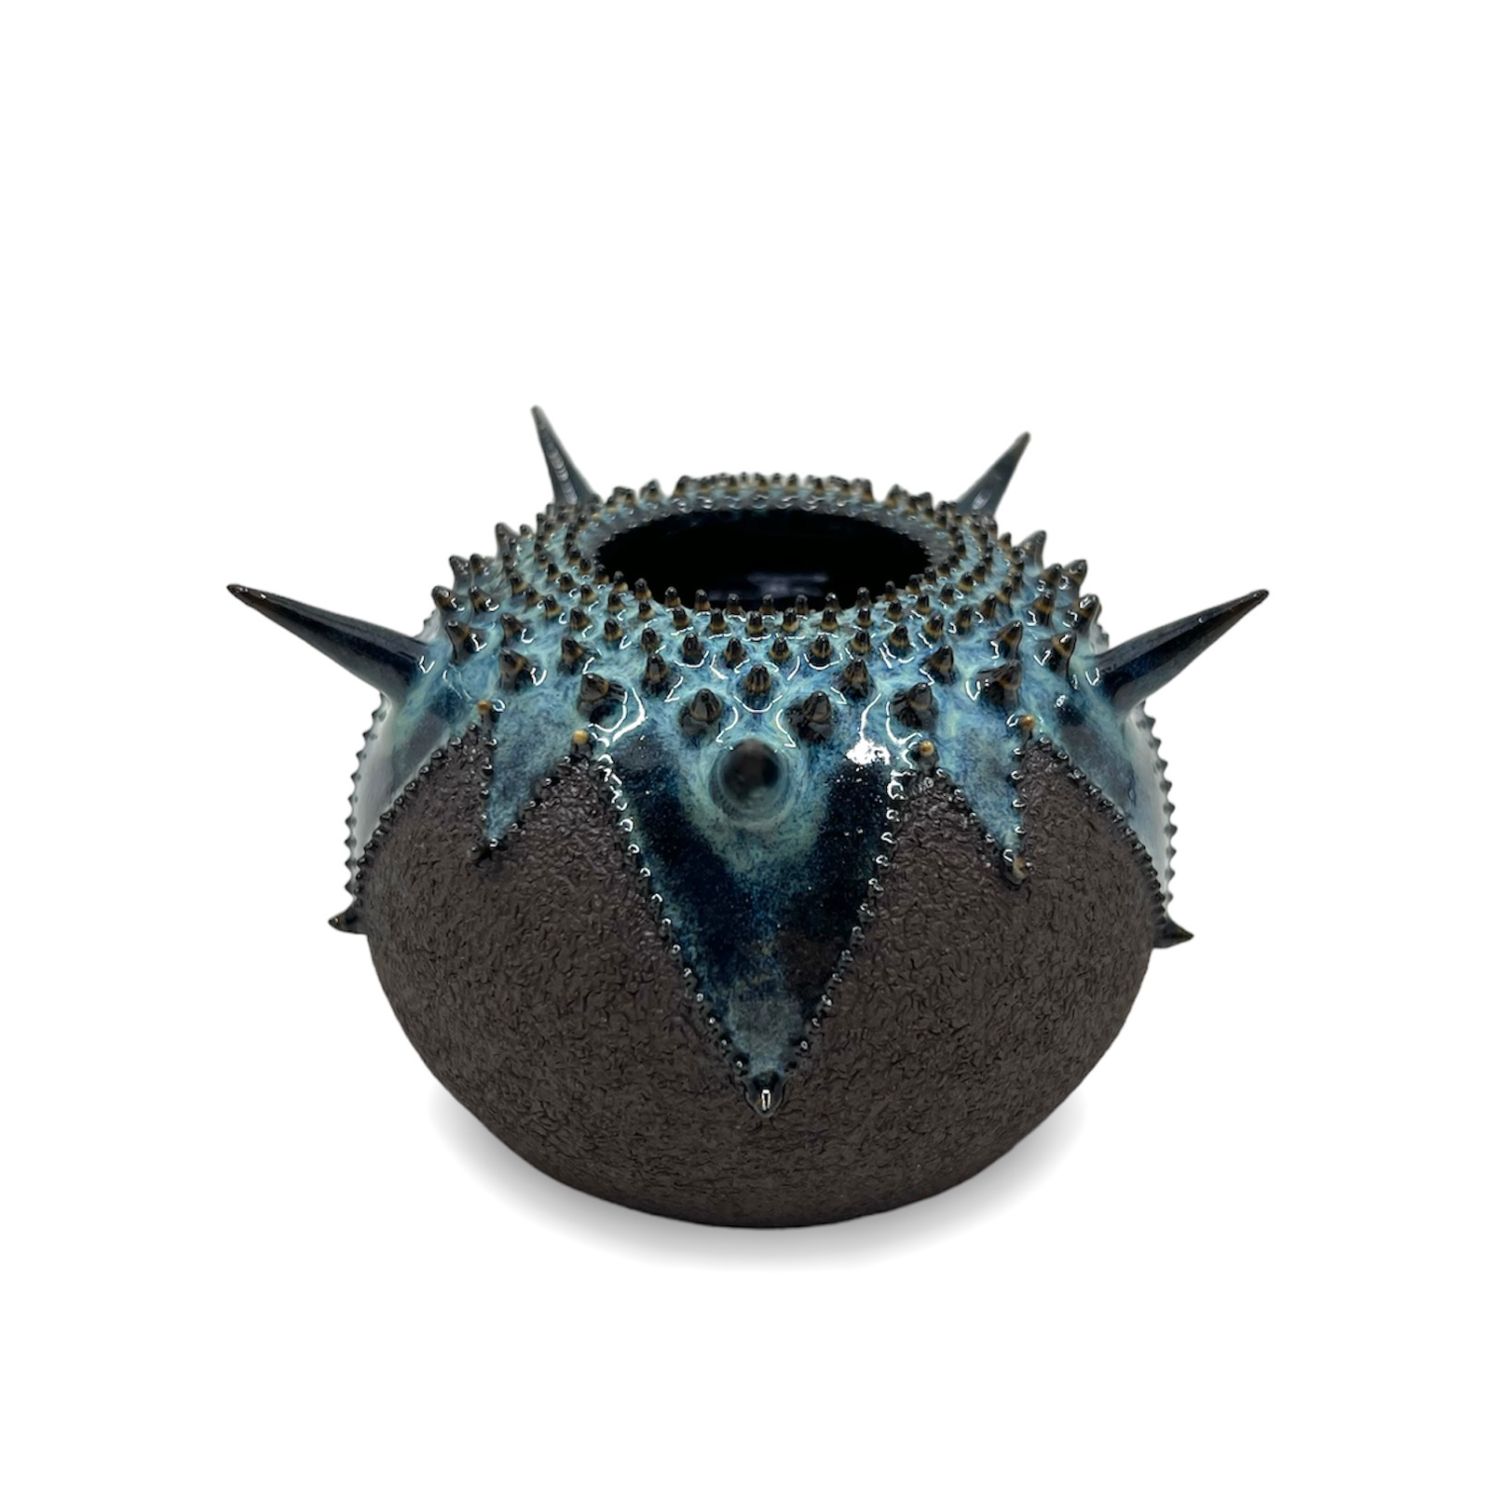 Zara Gardner: Black & Turquoise Urchin Sculpture with Spikes Product Image 1 of 4